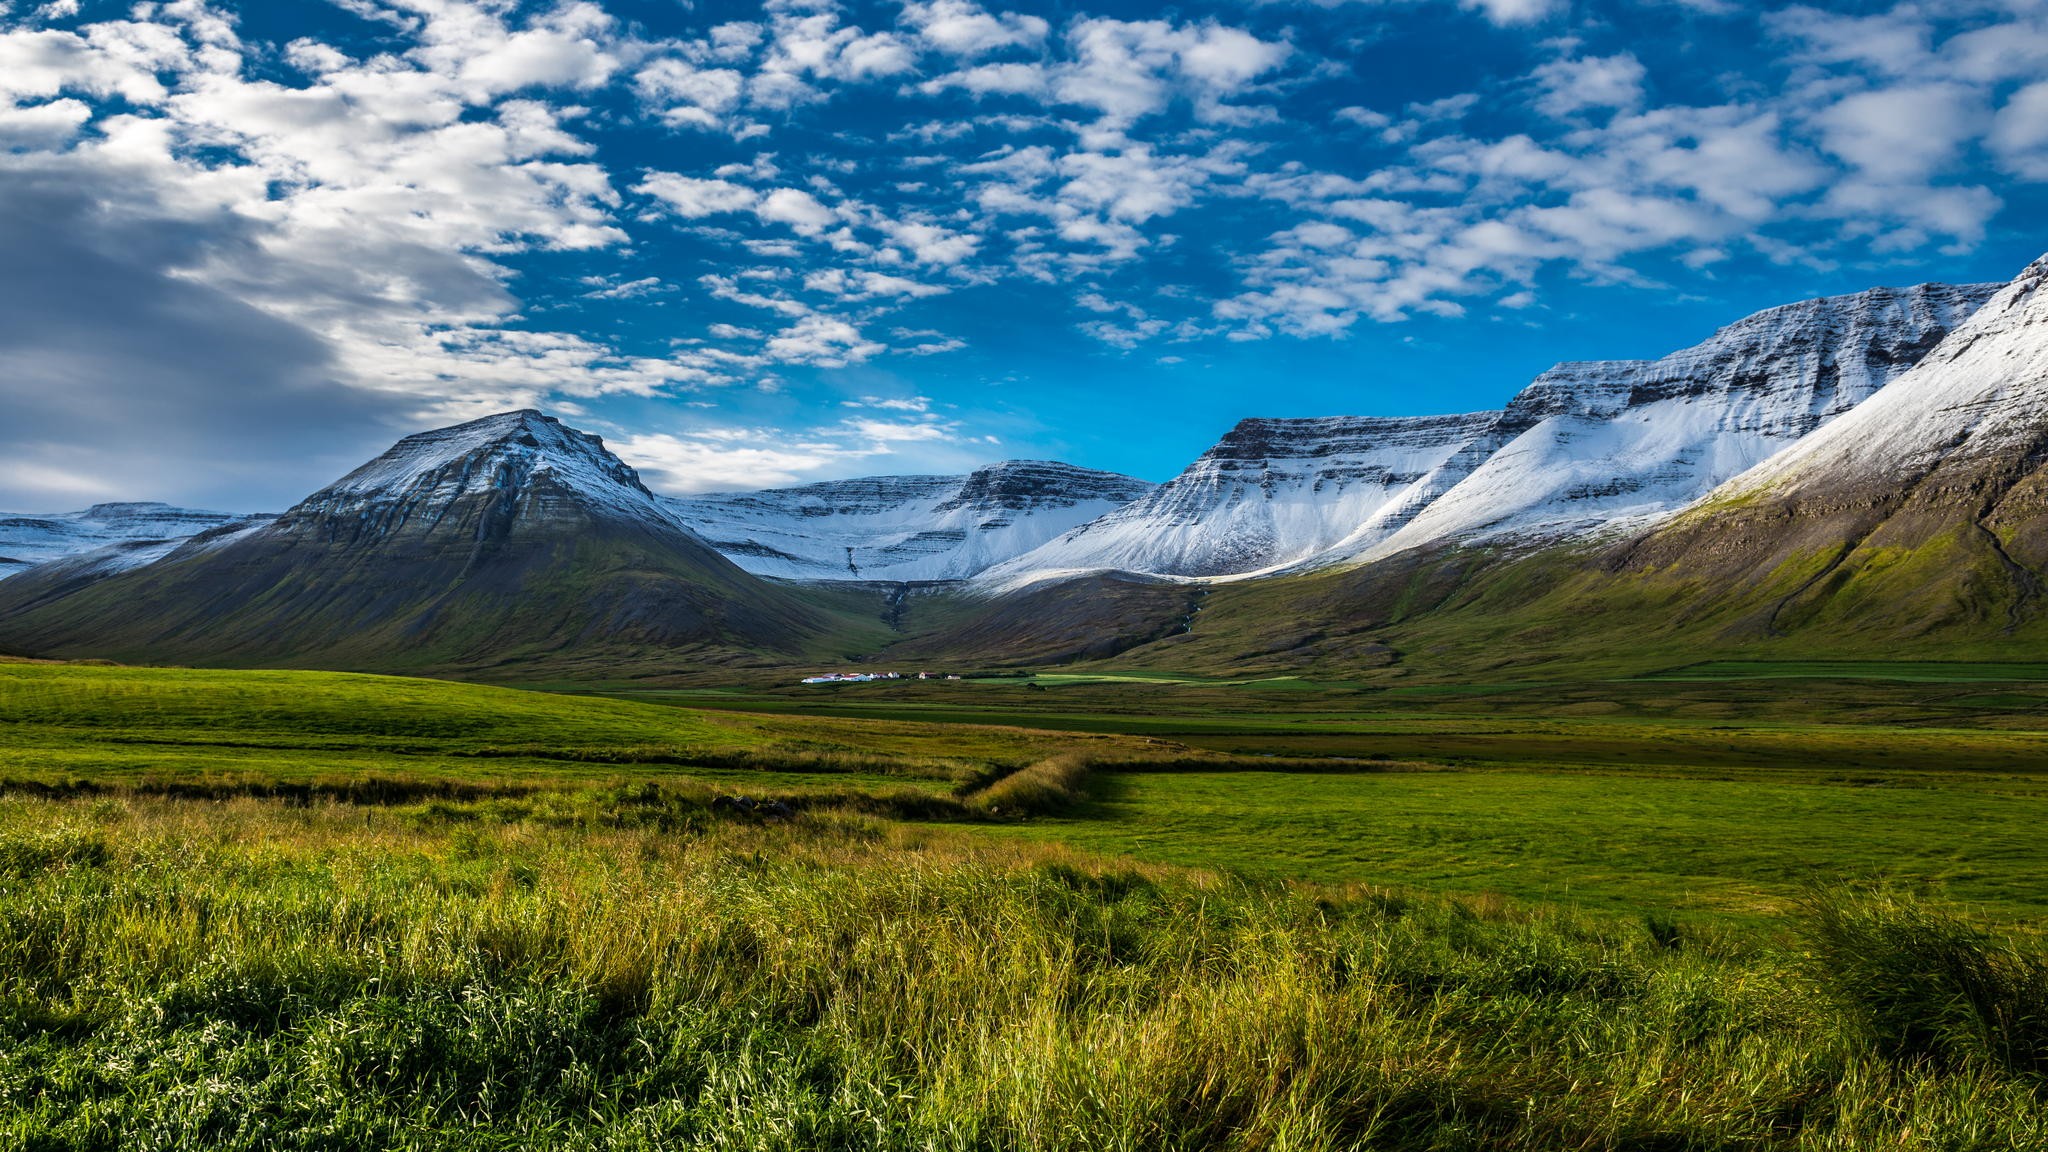 General 2048x1152 Iceland mountains snowy mountain valley landscape nordic landscapes field nature